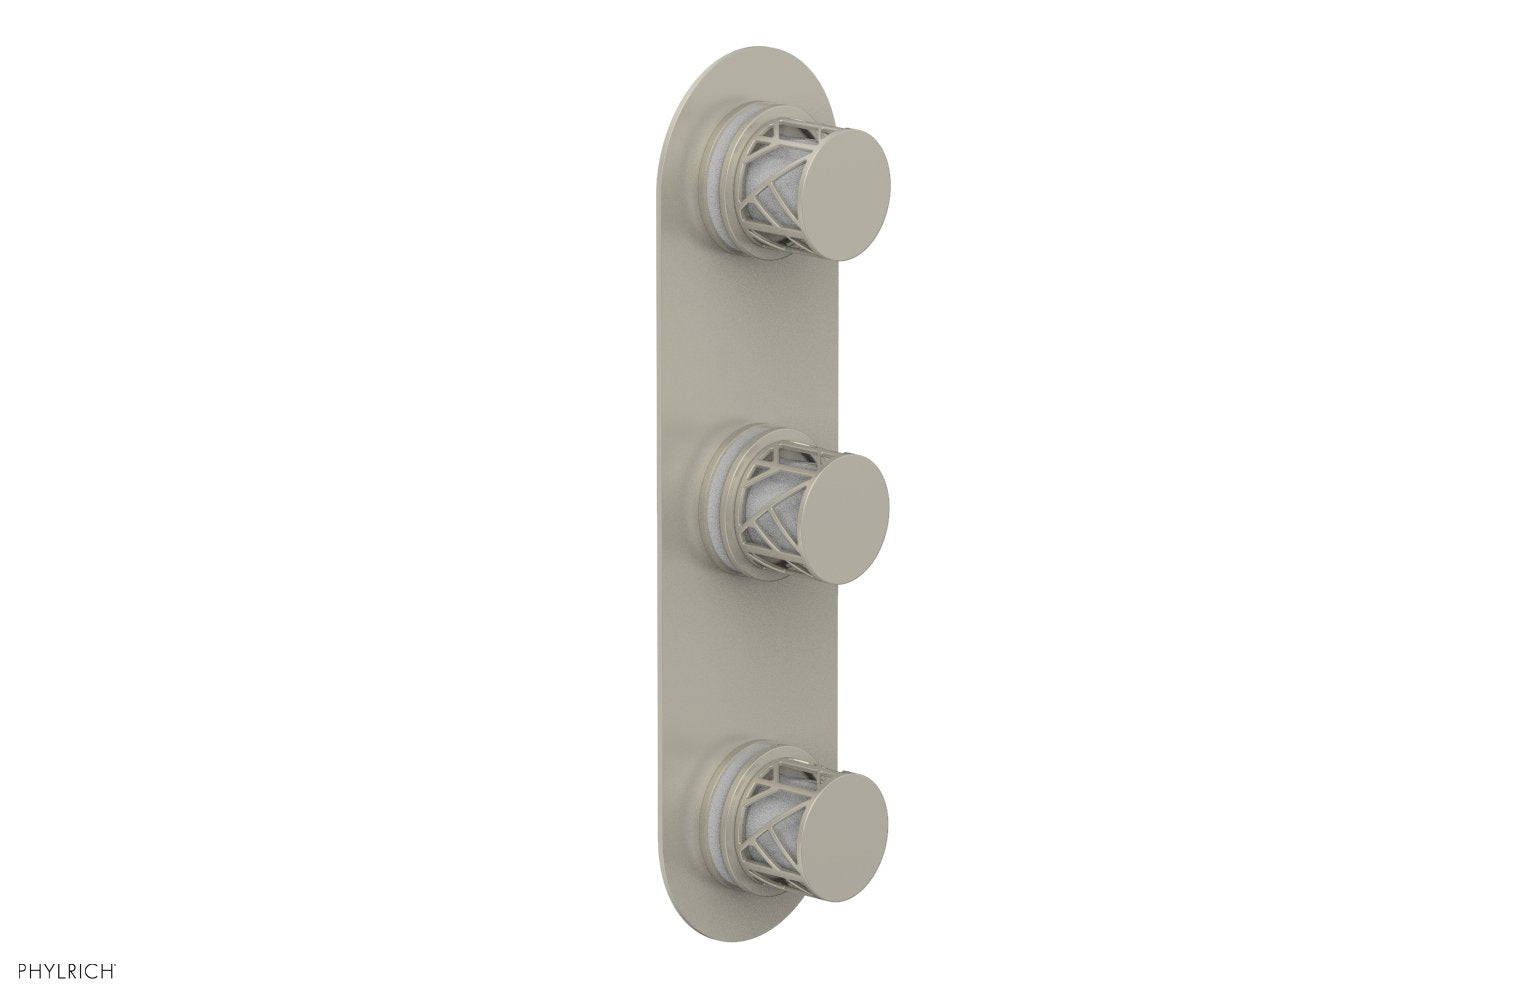 Phylrich JOLIE Thermostatic Valve with Two Volume Control with "White" Accents